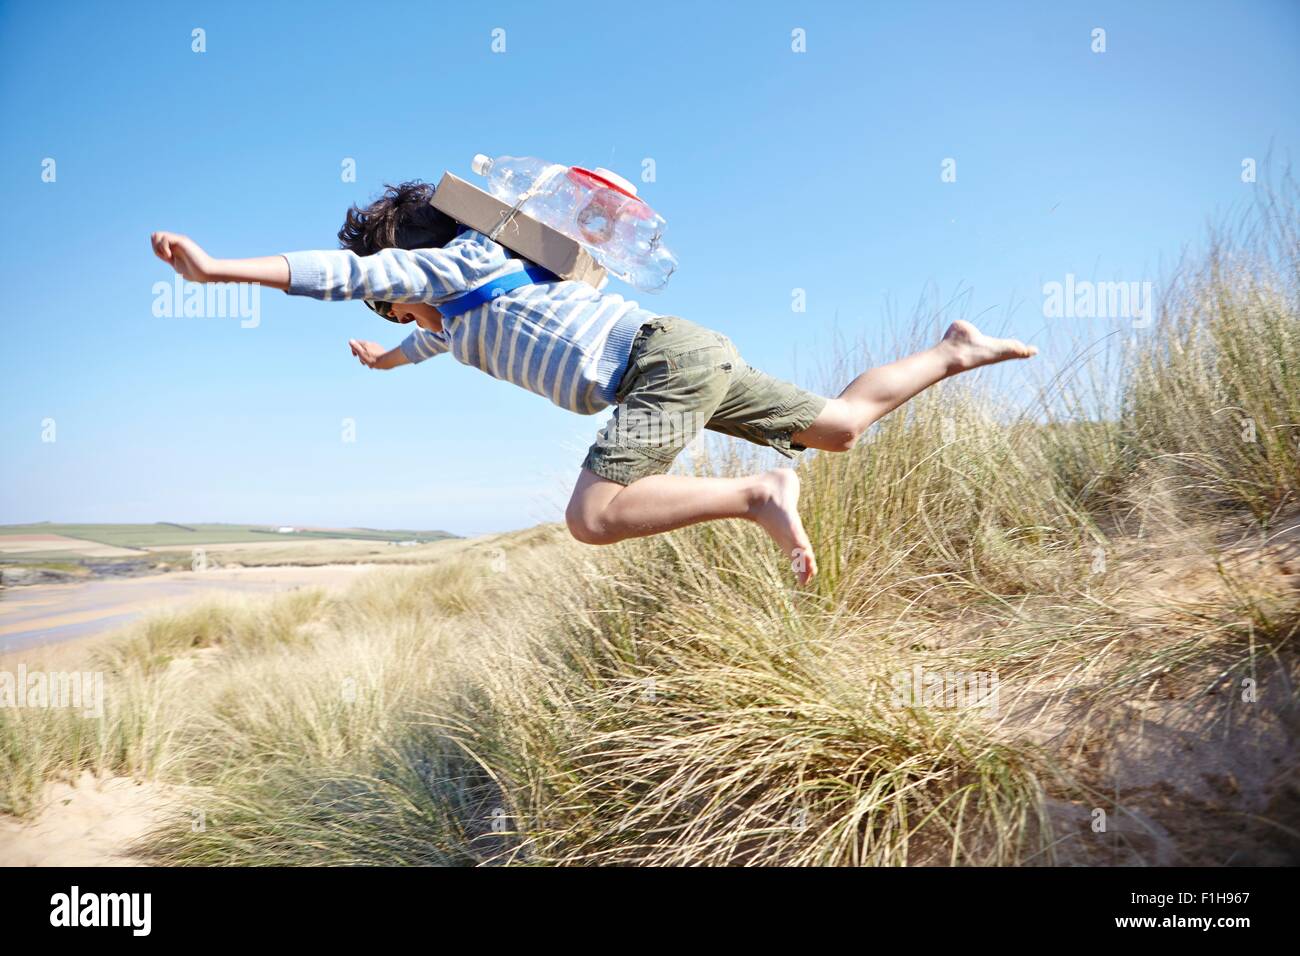 Young boy on beach, wearing fancy dress, leaping into air Stock Photo